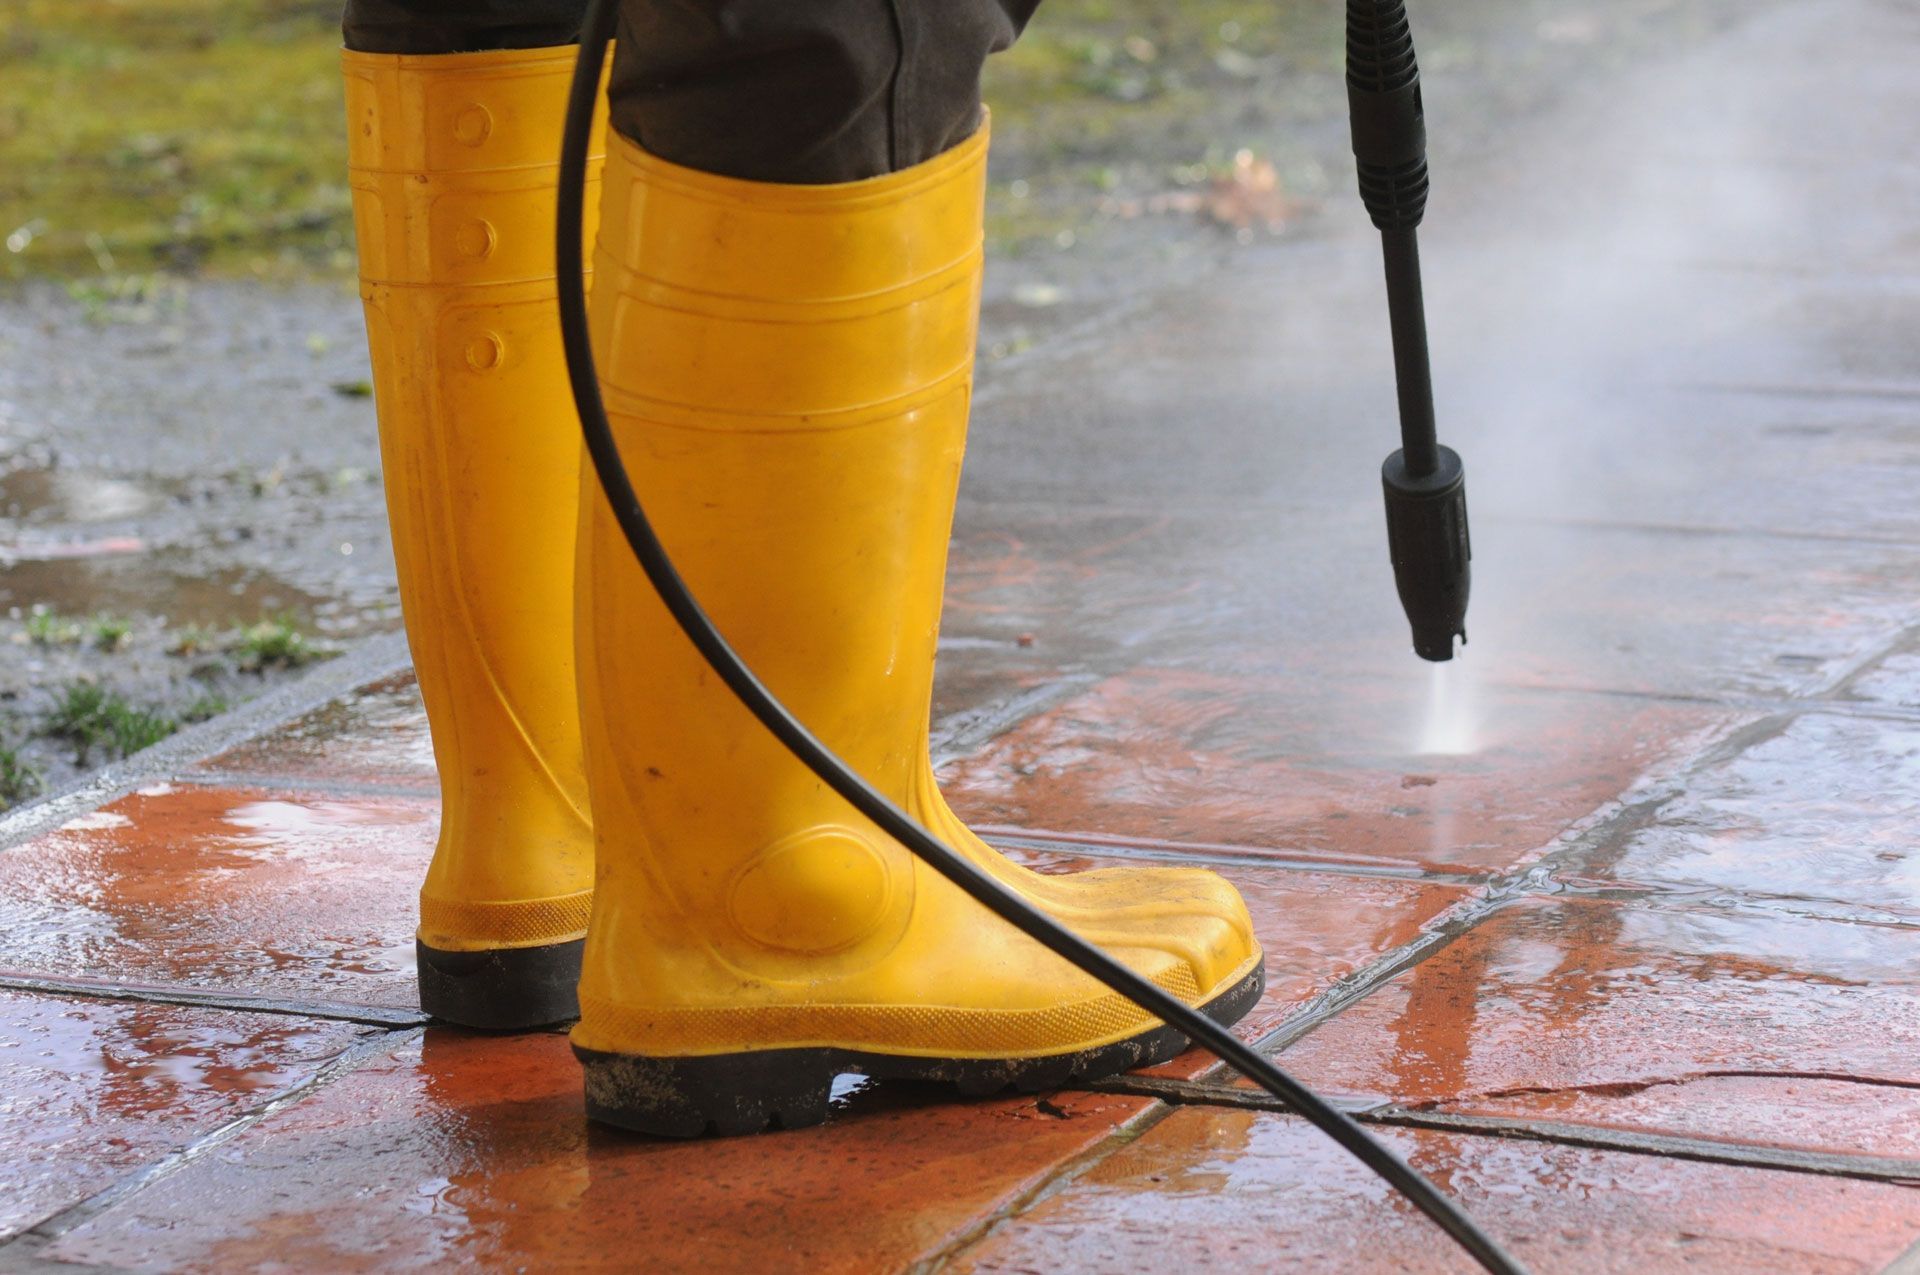 Difference Between Soft Washing and Pressure Washing